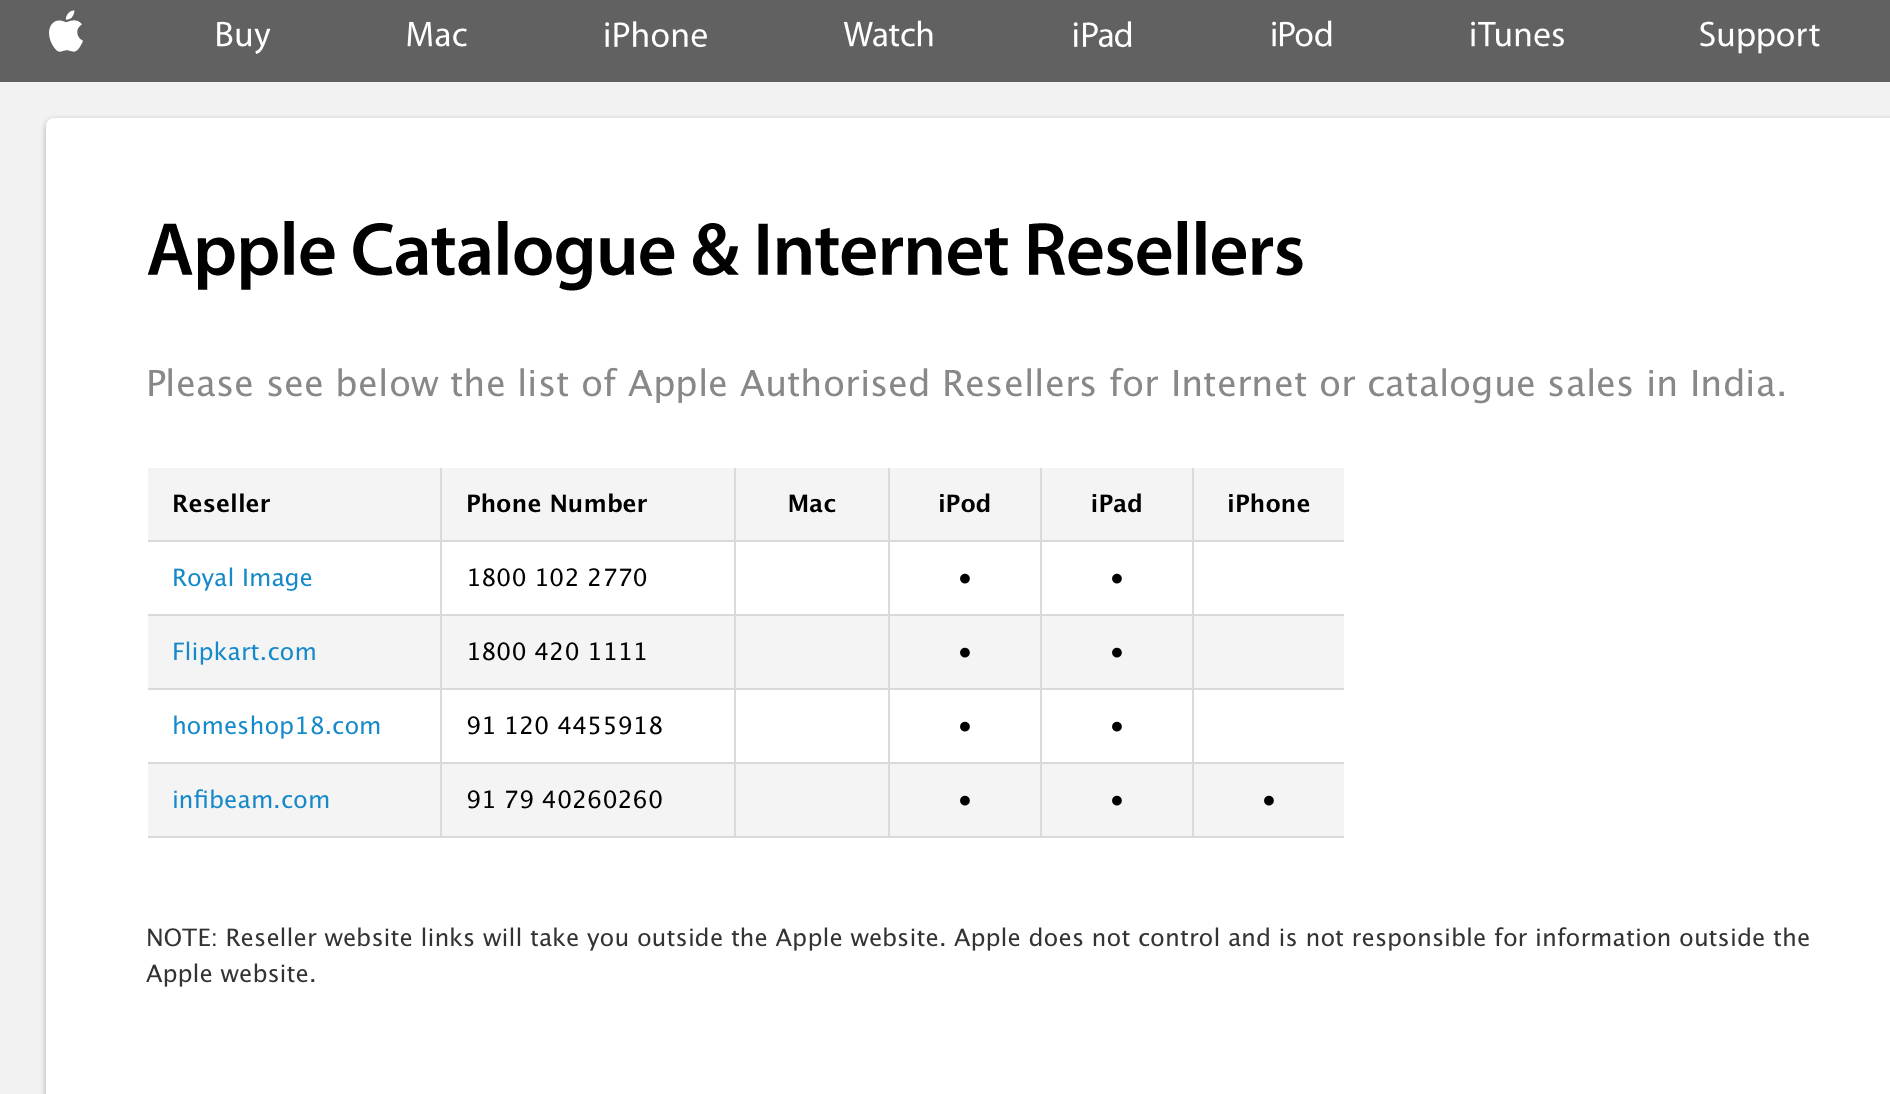 Apple's authorized resellers